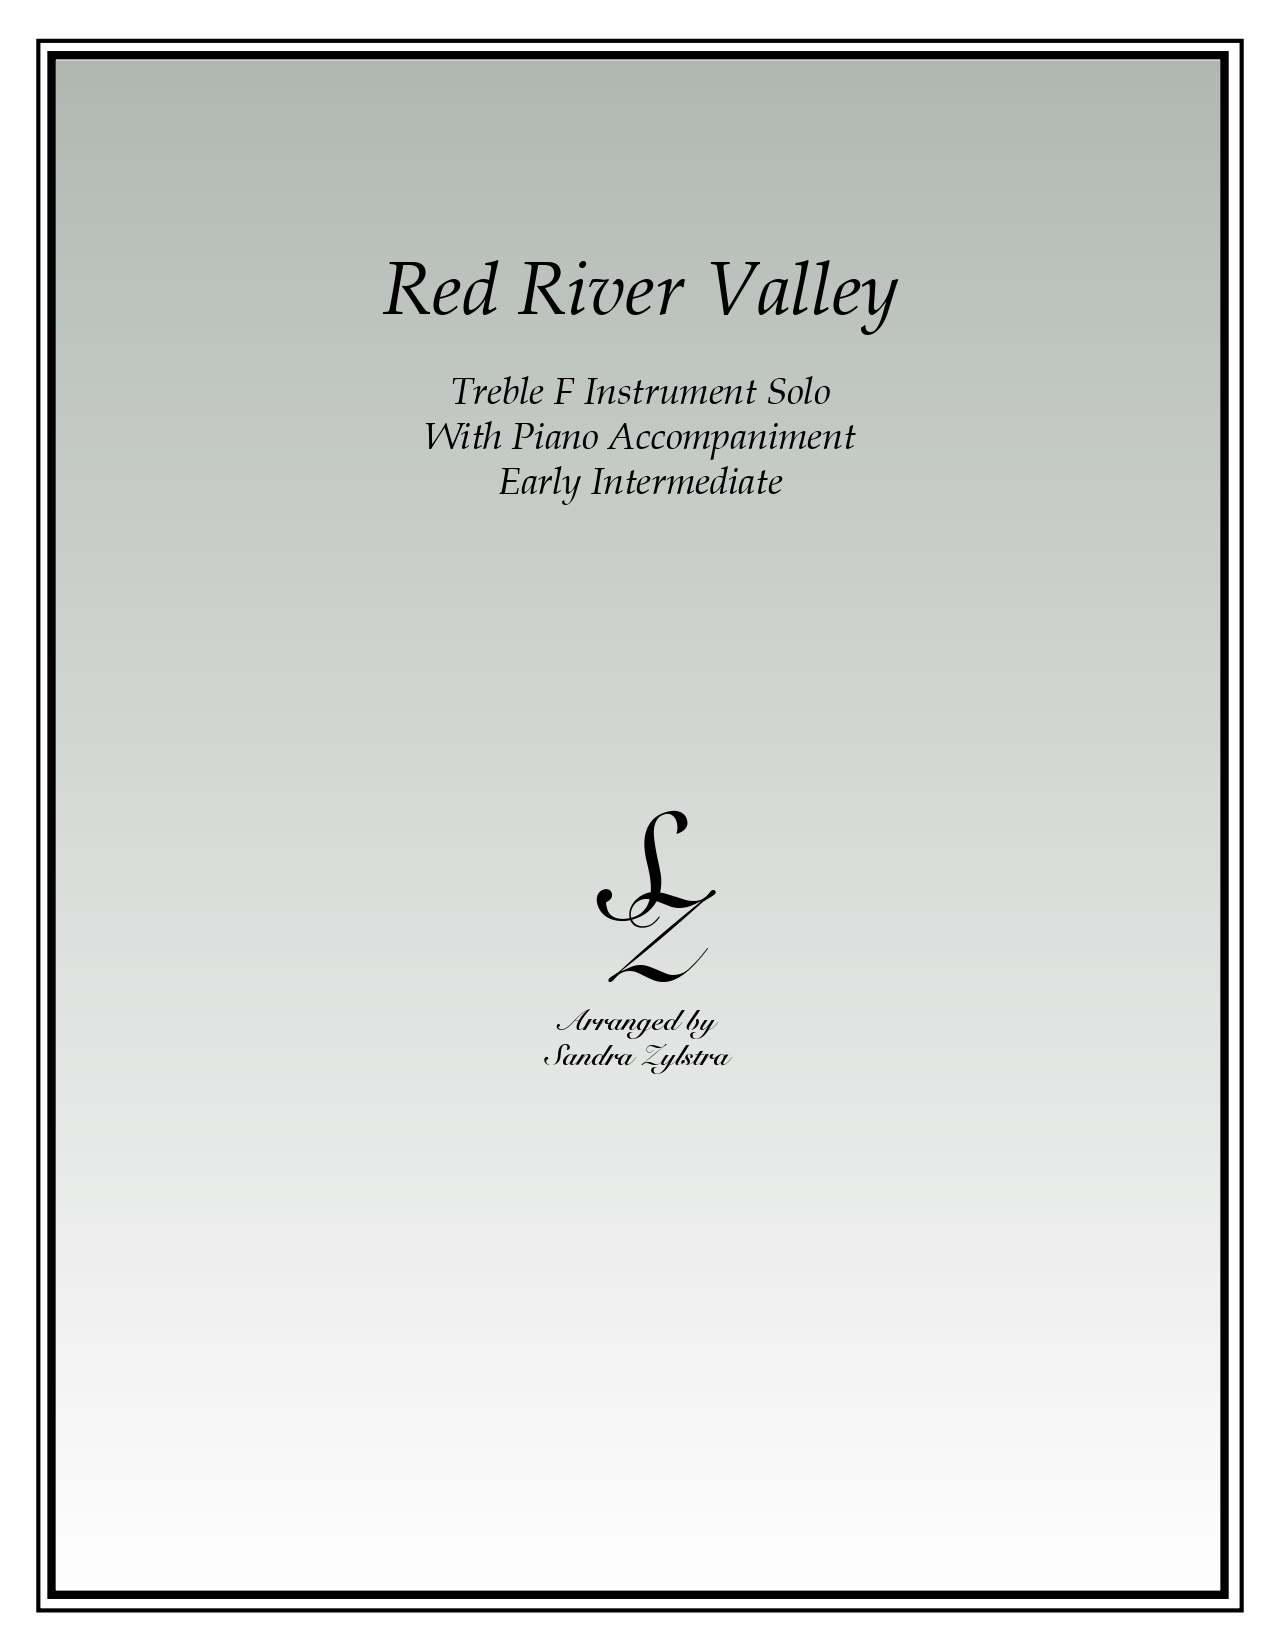 Red River Valley F instrument solo part cover page 00011